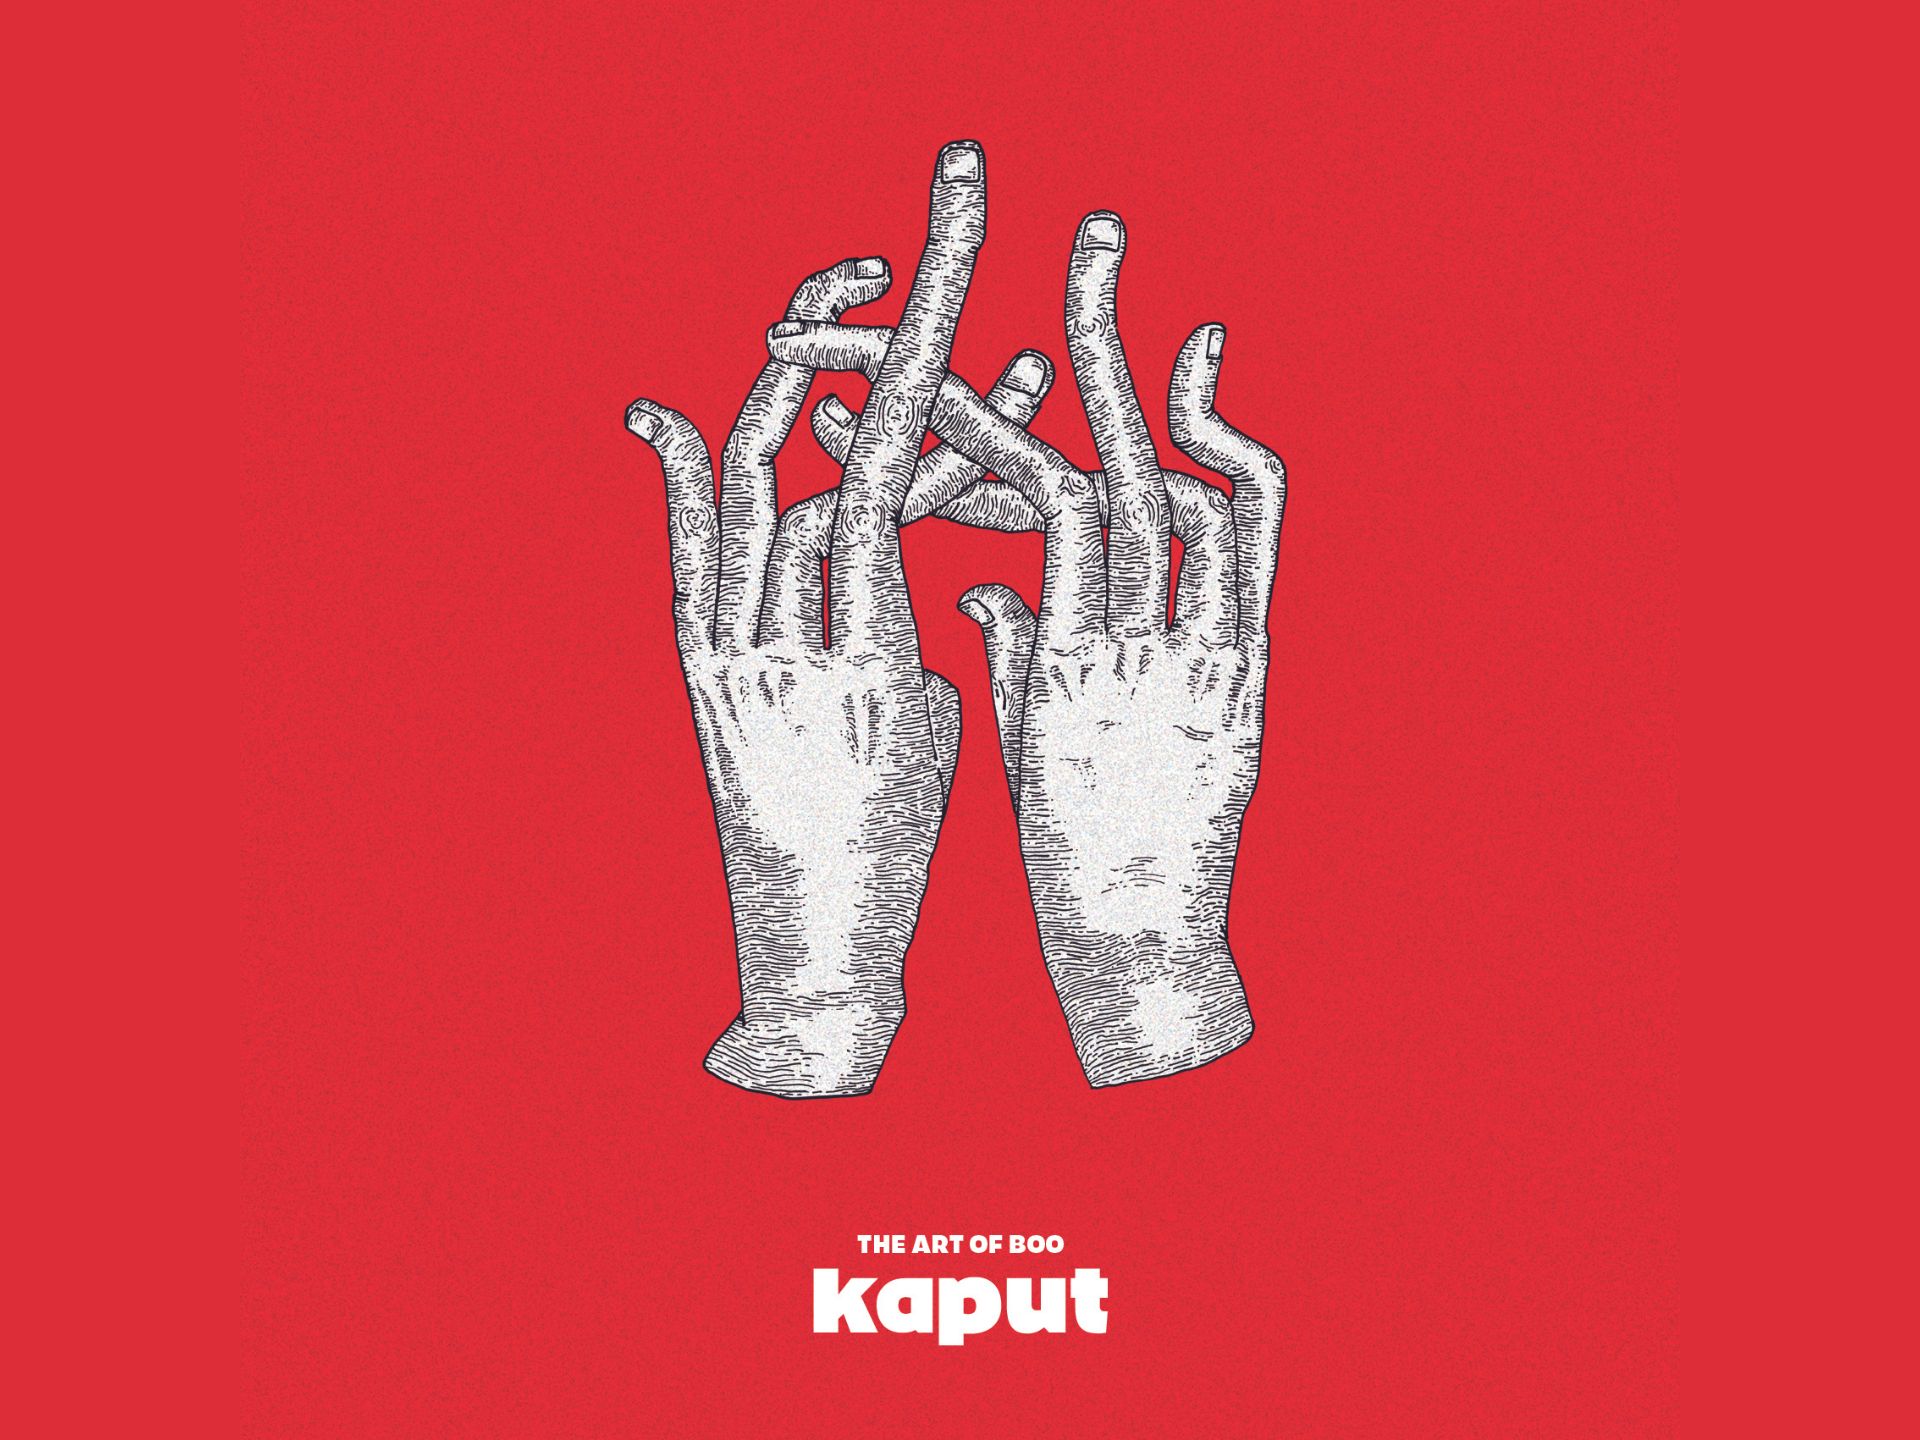 The image shows hands with distorted fingers before a red background.